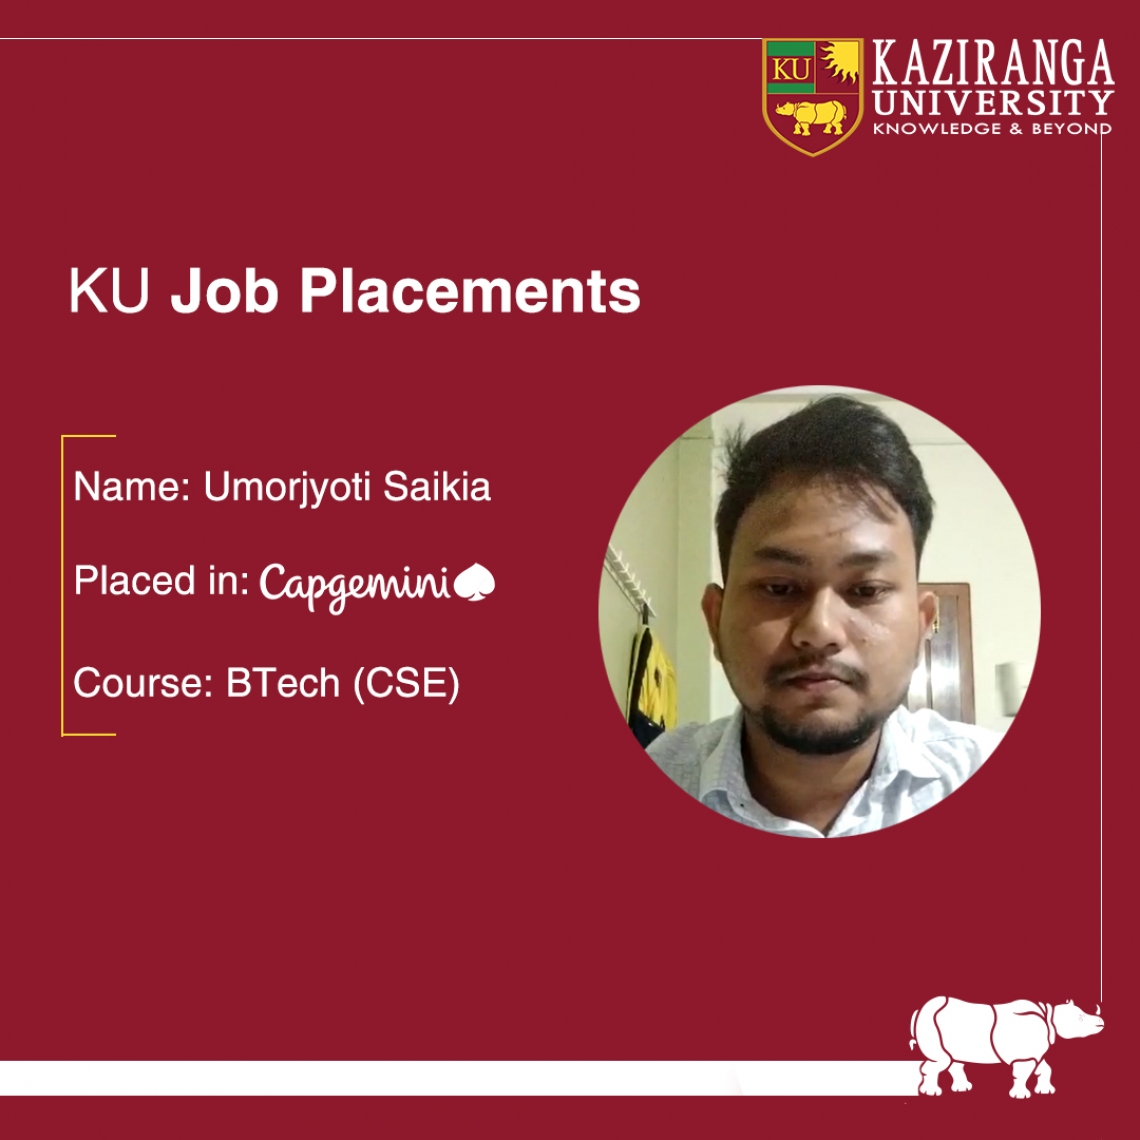 Congratulations on getting placed at M/s. Capgemini